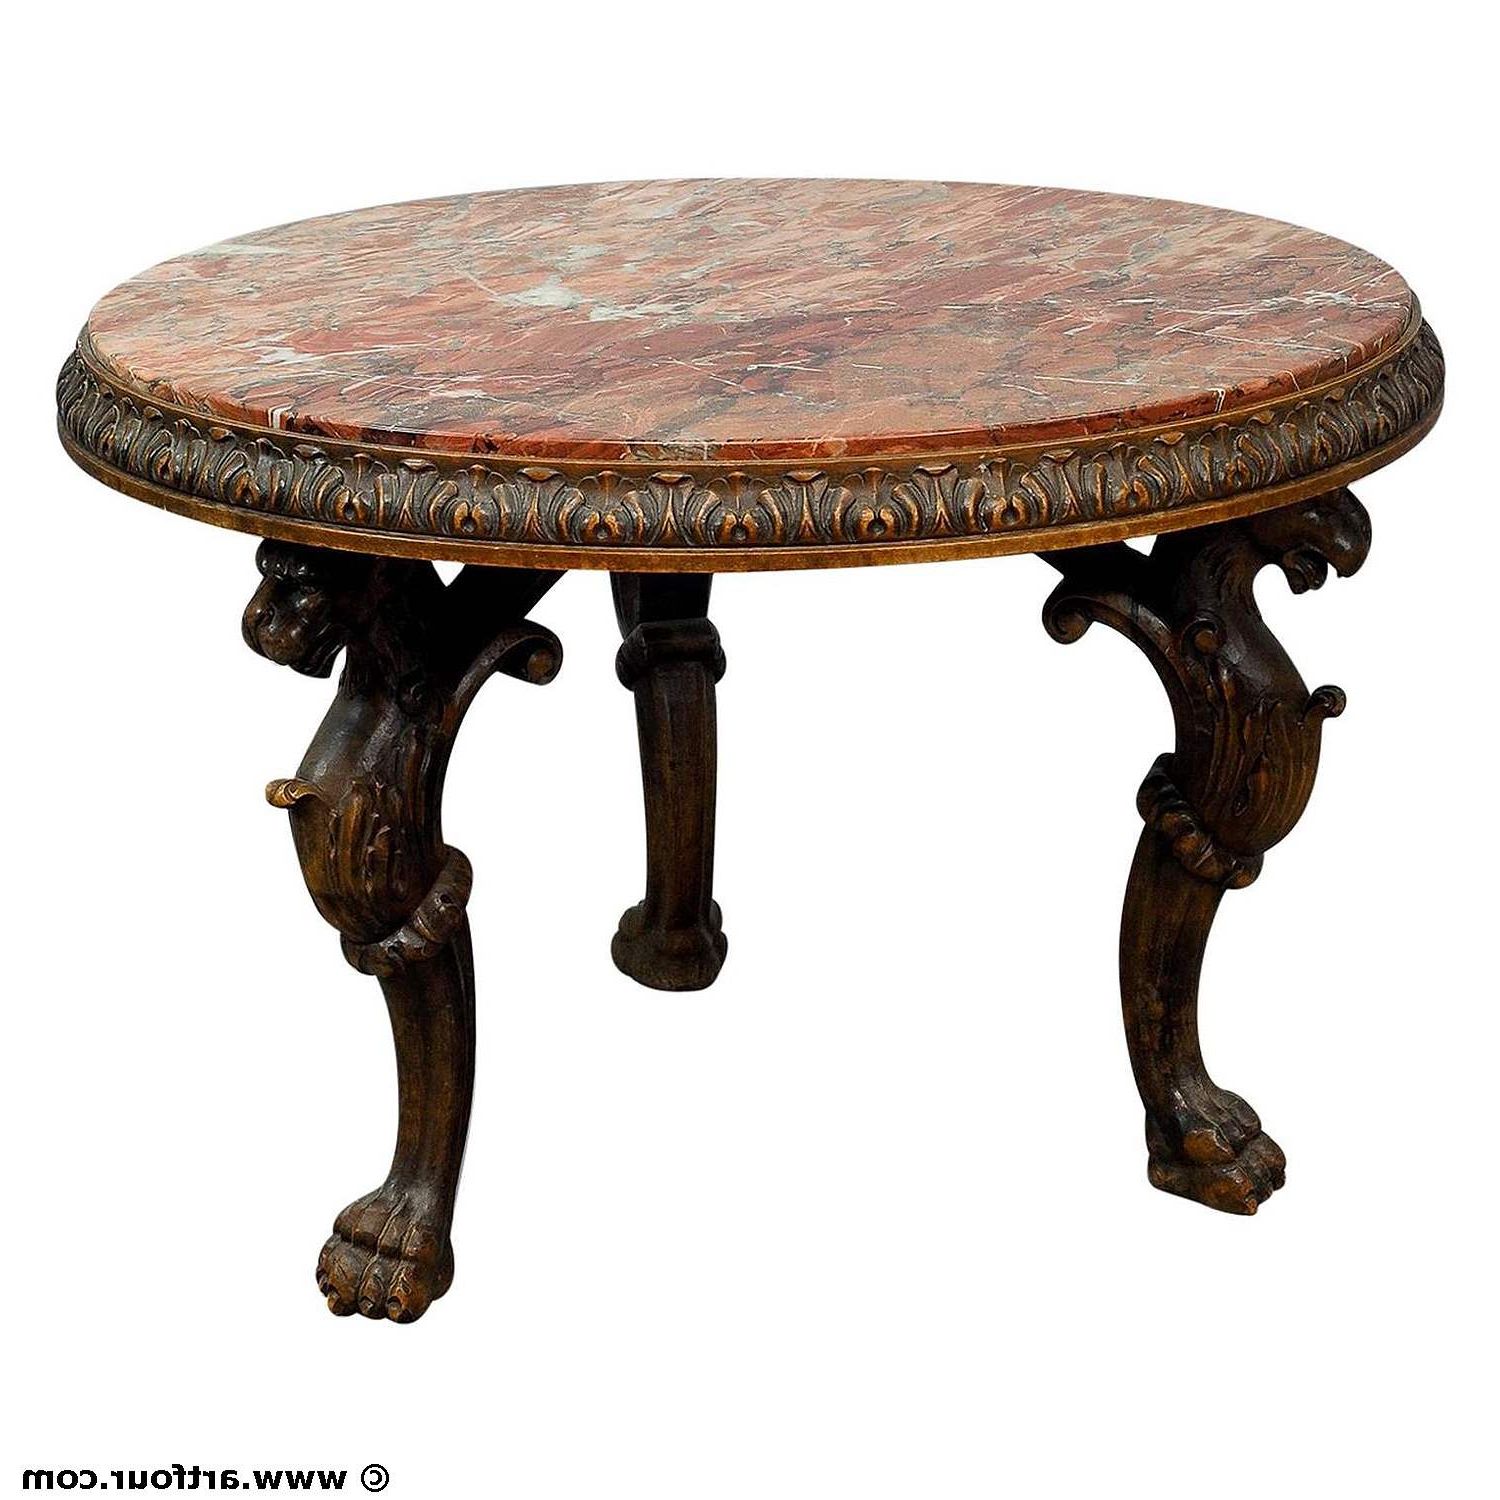 Antique Marble Cocktail Table With Carved Gargoyle Feet Within Most Current Antique Cocktail Tables (View 12 of 20)